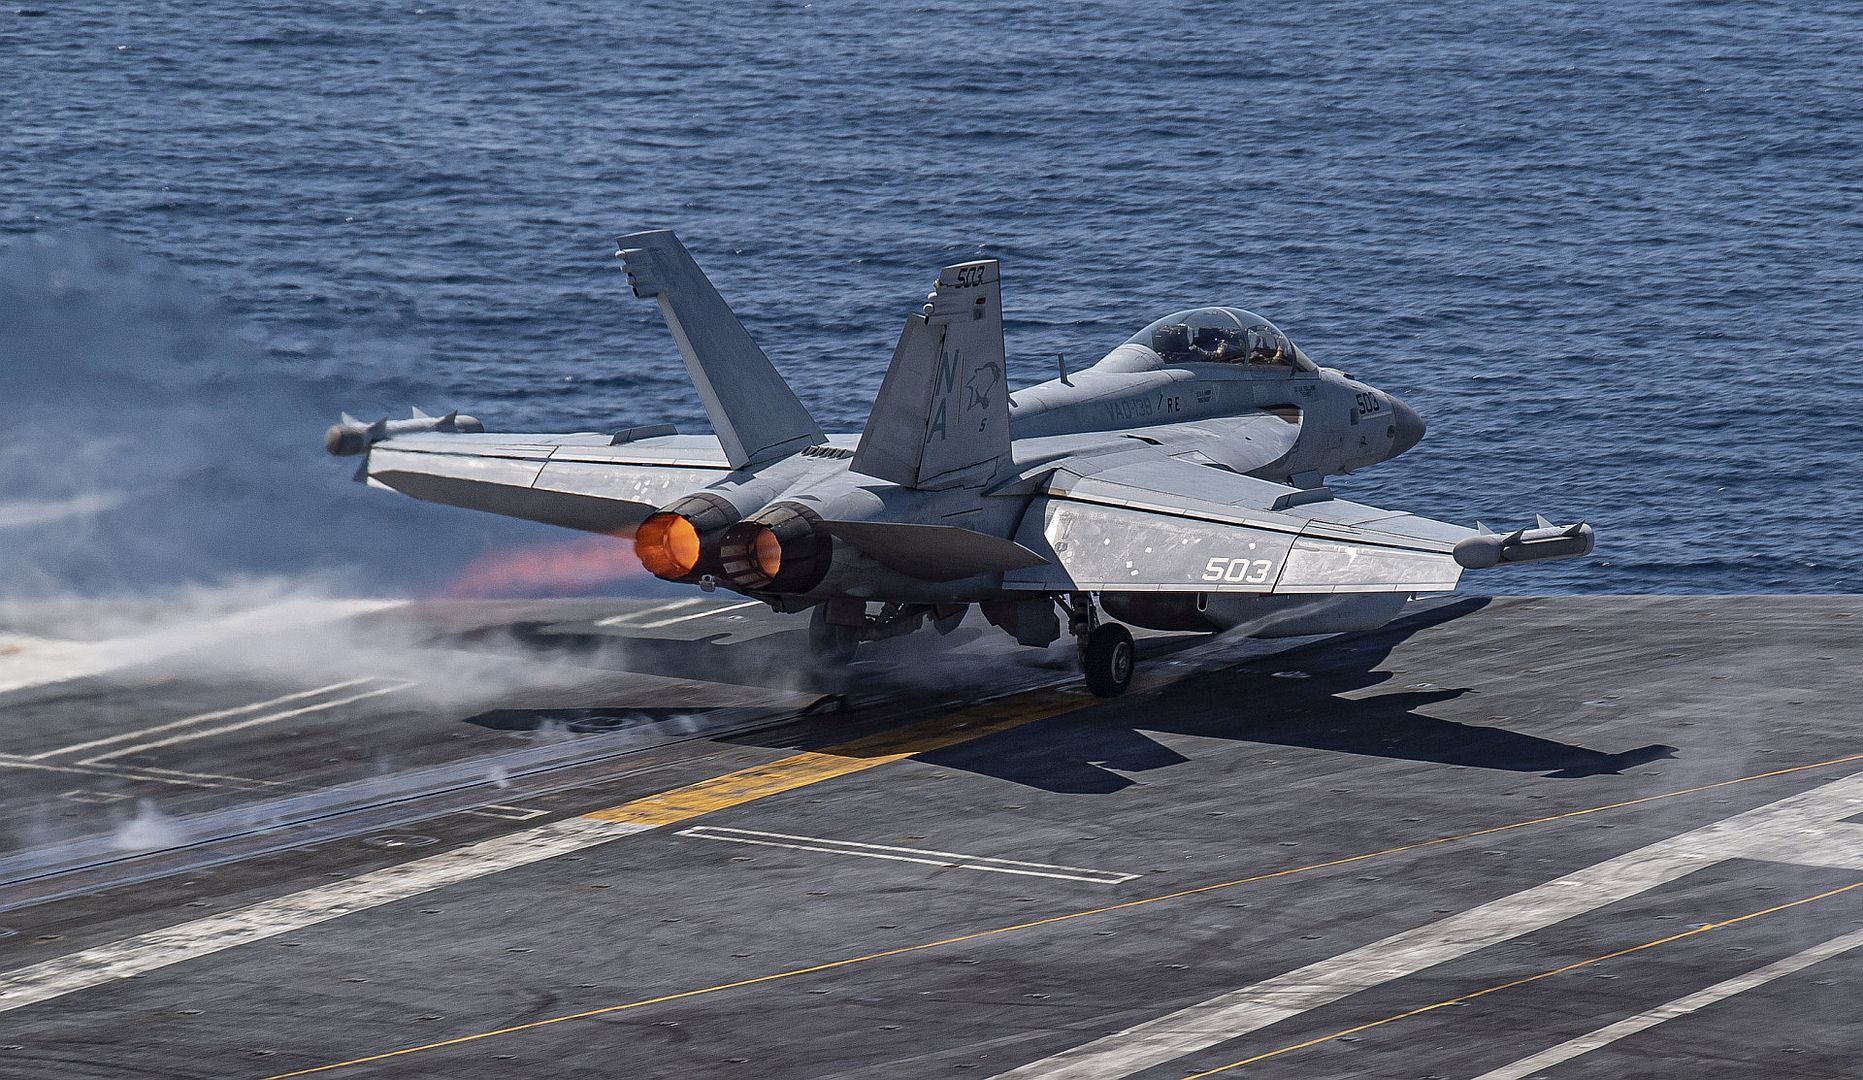  139 Launches From The Flight Deck Of The Aircraft Carrier USS Nimitz XxGtscvnGDHwngjGczQ3Nu